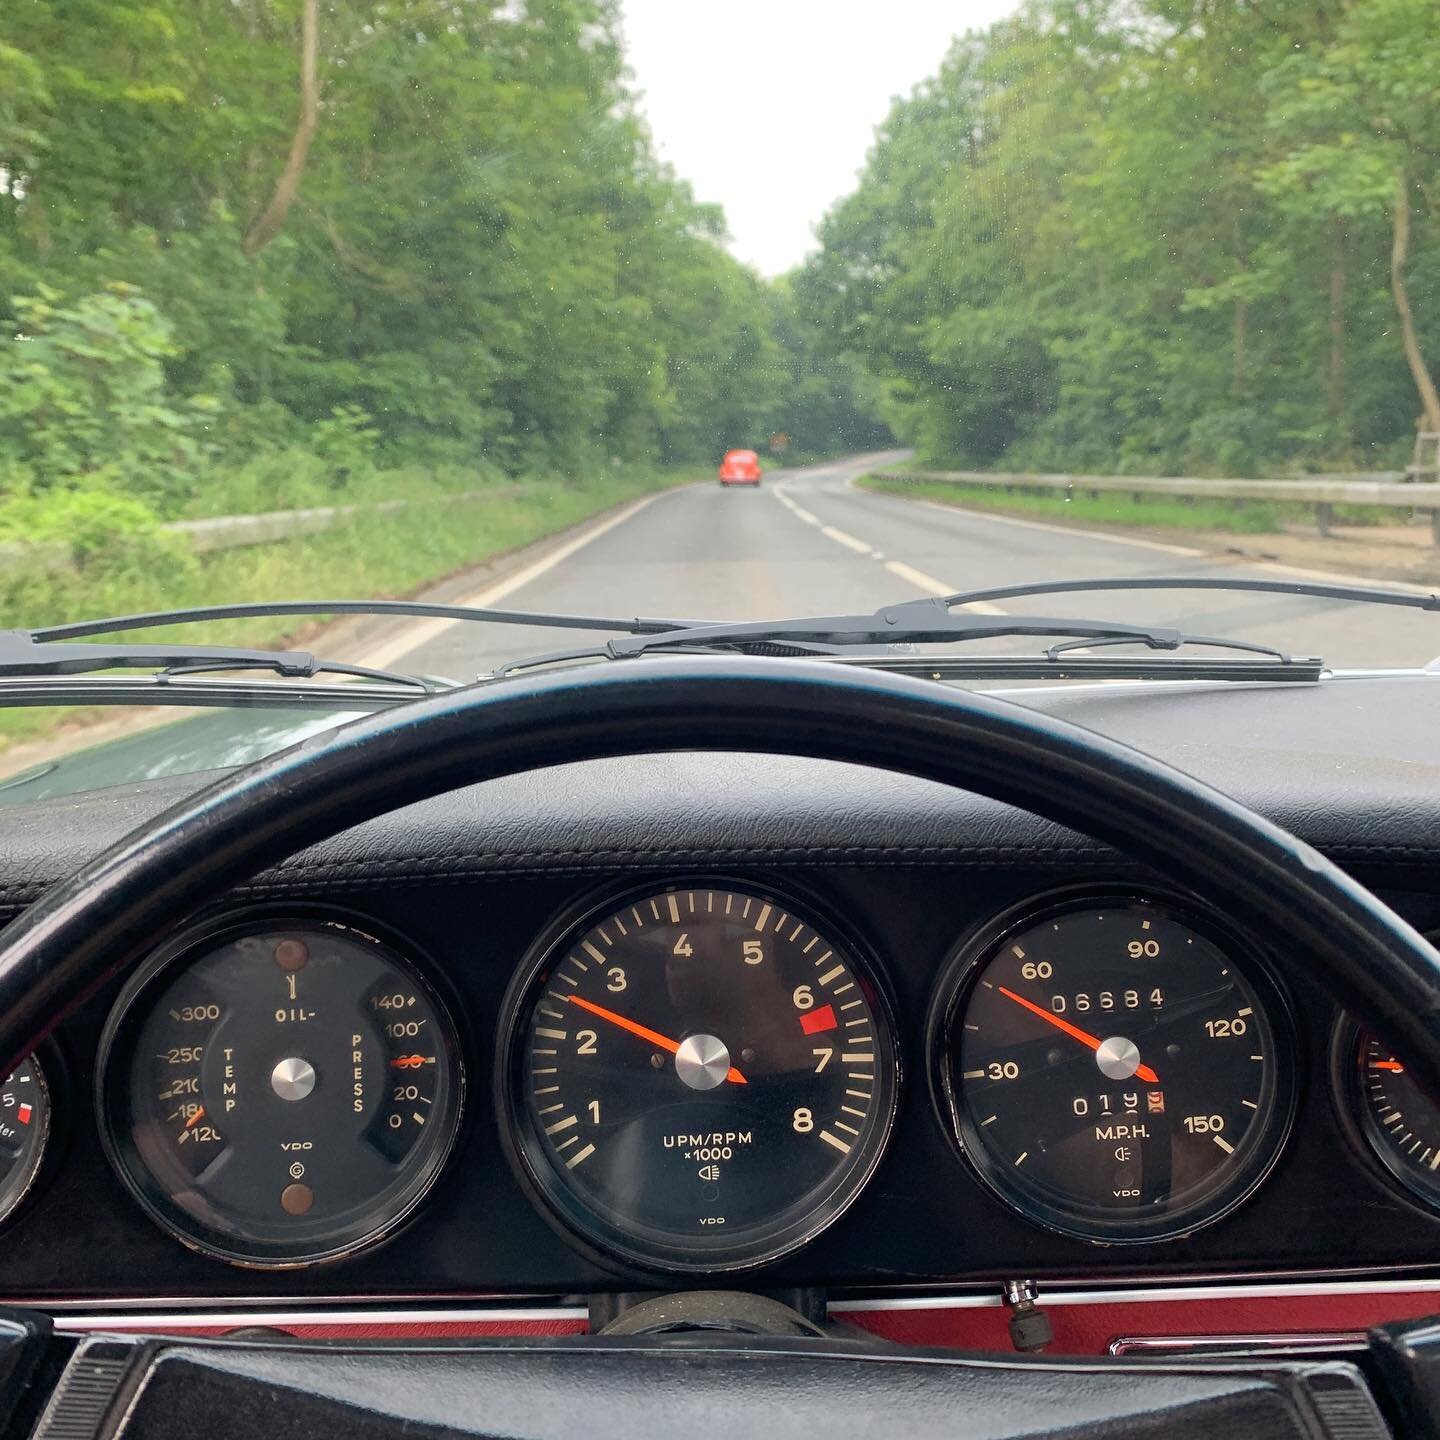 On our way to Bicester super scramble🏁 with @classiccarrevivals. Are you going? #hvsuk #classiccarstorage #classicporsche #aircooled #bicesterheritage #superscramble #porsche911 #911t #vwbeetle #germanlook #turbo #turbobeetle _______________________